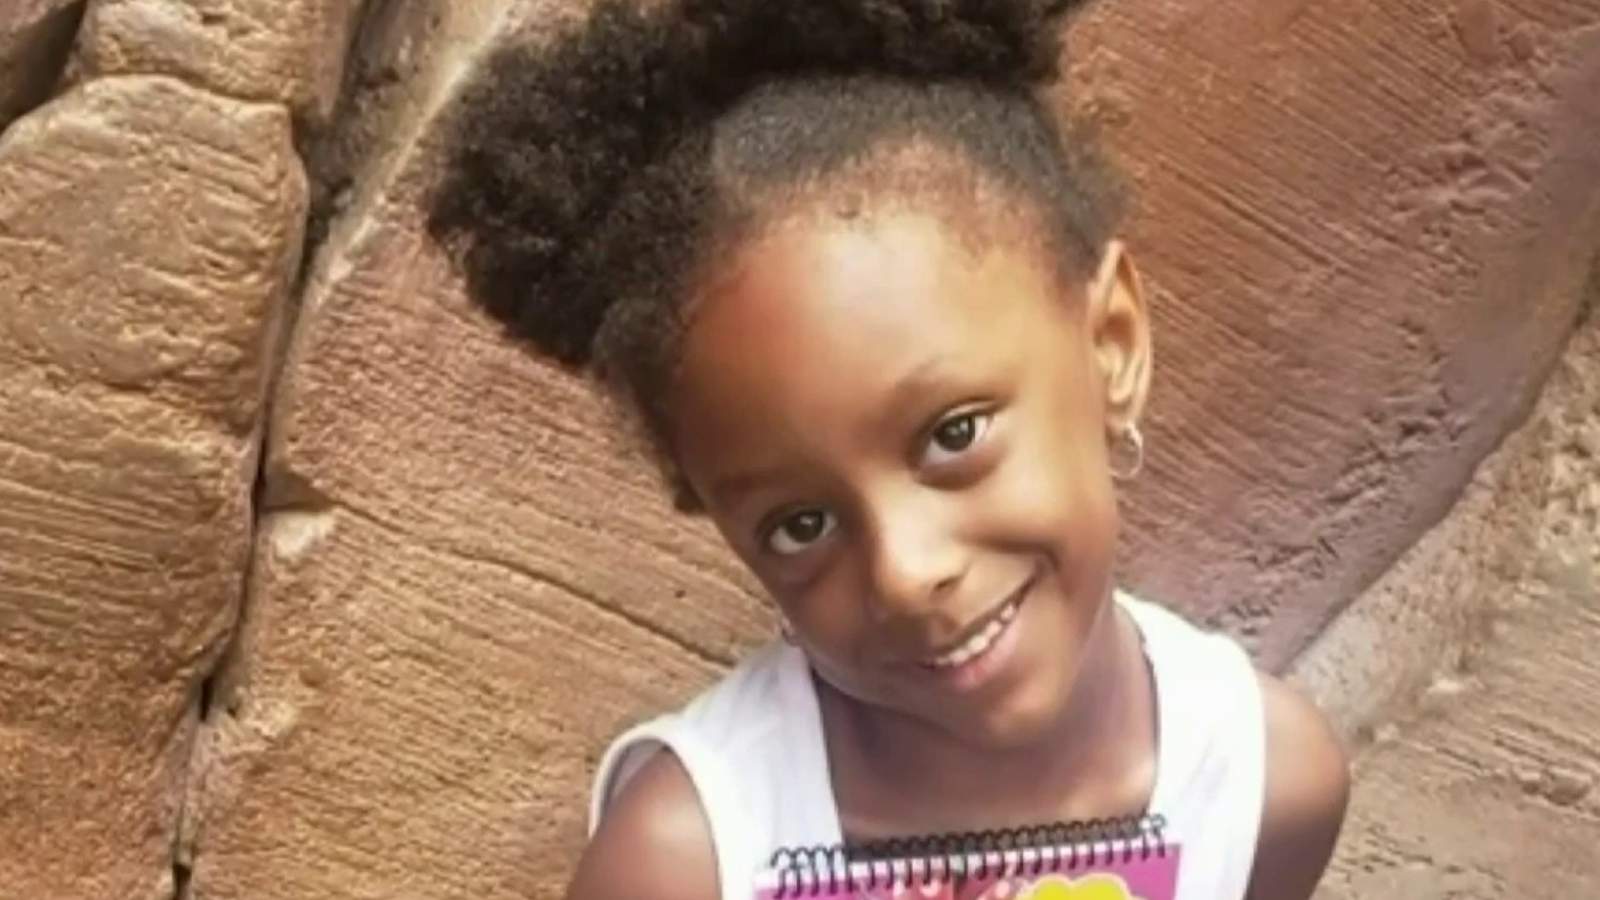 5-year-old girl who died from COVID honored at Detroit Public Safety Headquarters